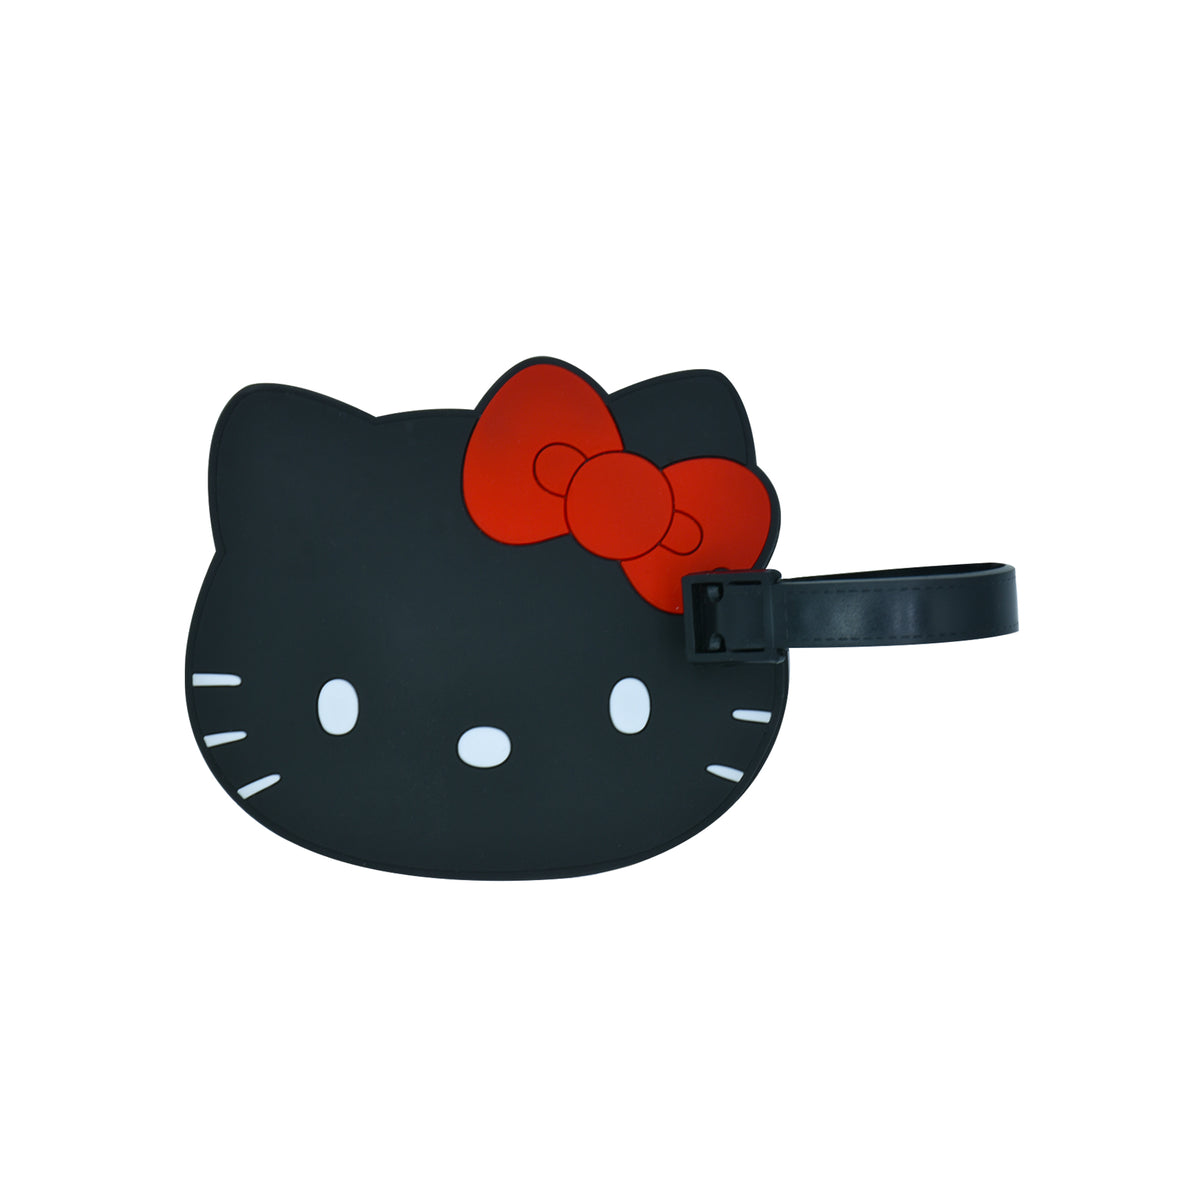 Hello Kitty x FUL Black Luggage Tag Travel Concept 1   